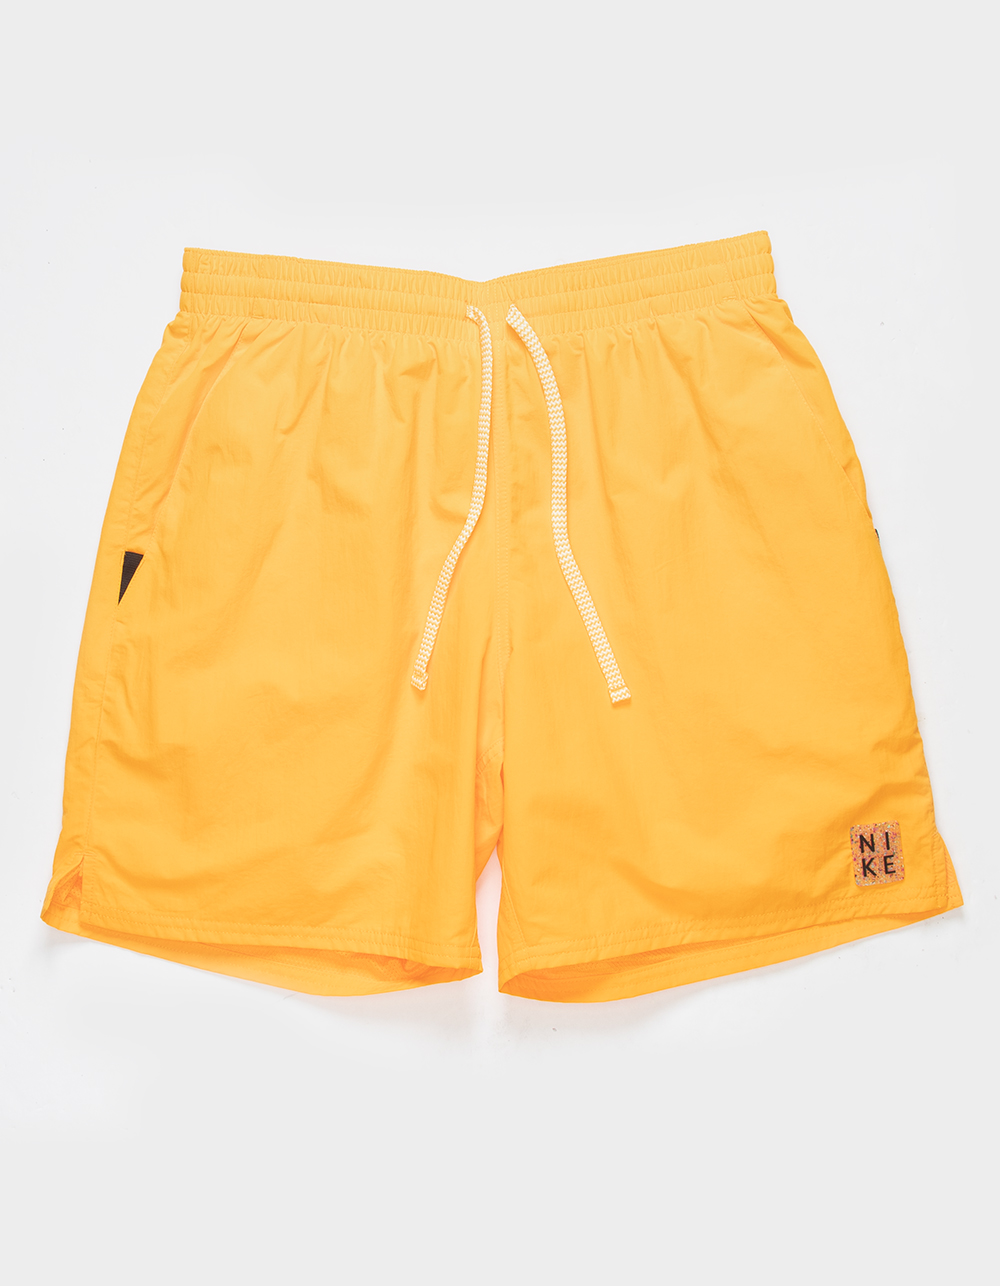 NIKE Icon Solid Mens Volley Swim Trunks - GOLD/YELLOW | Tillys